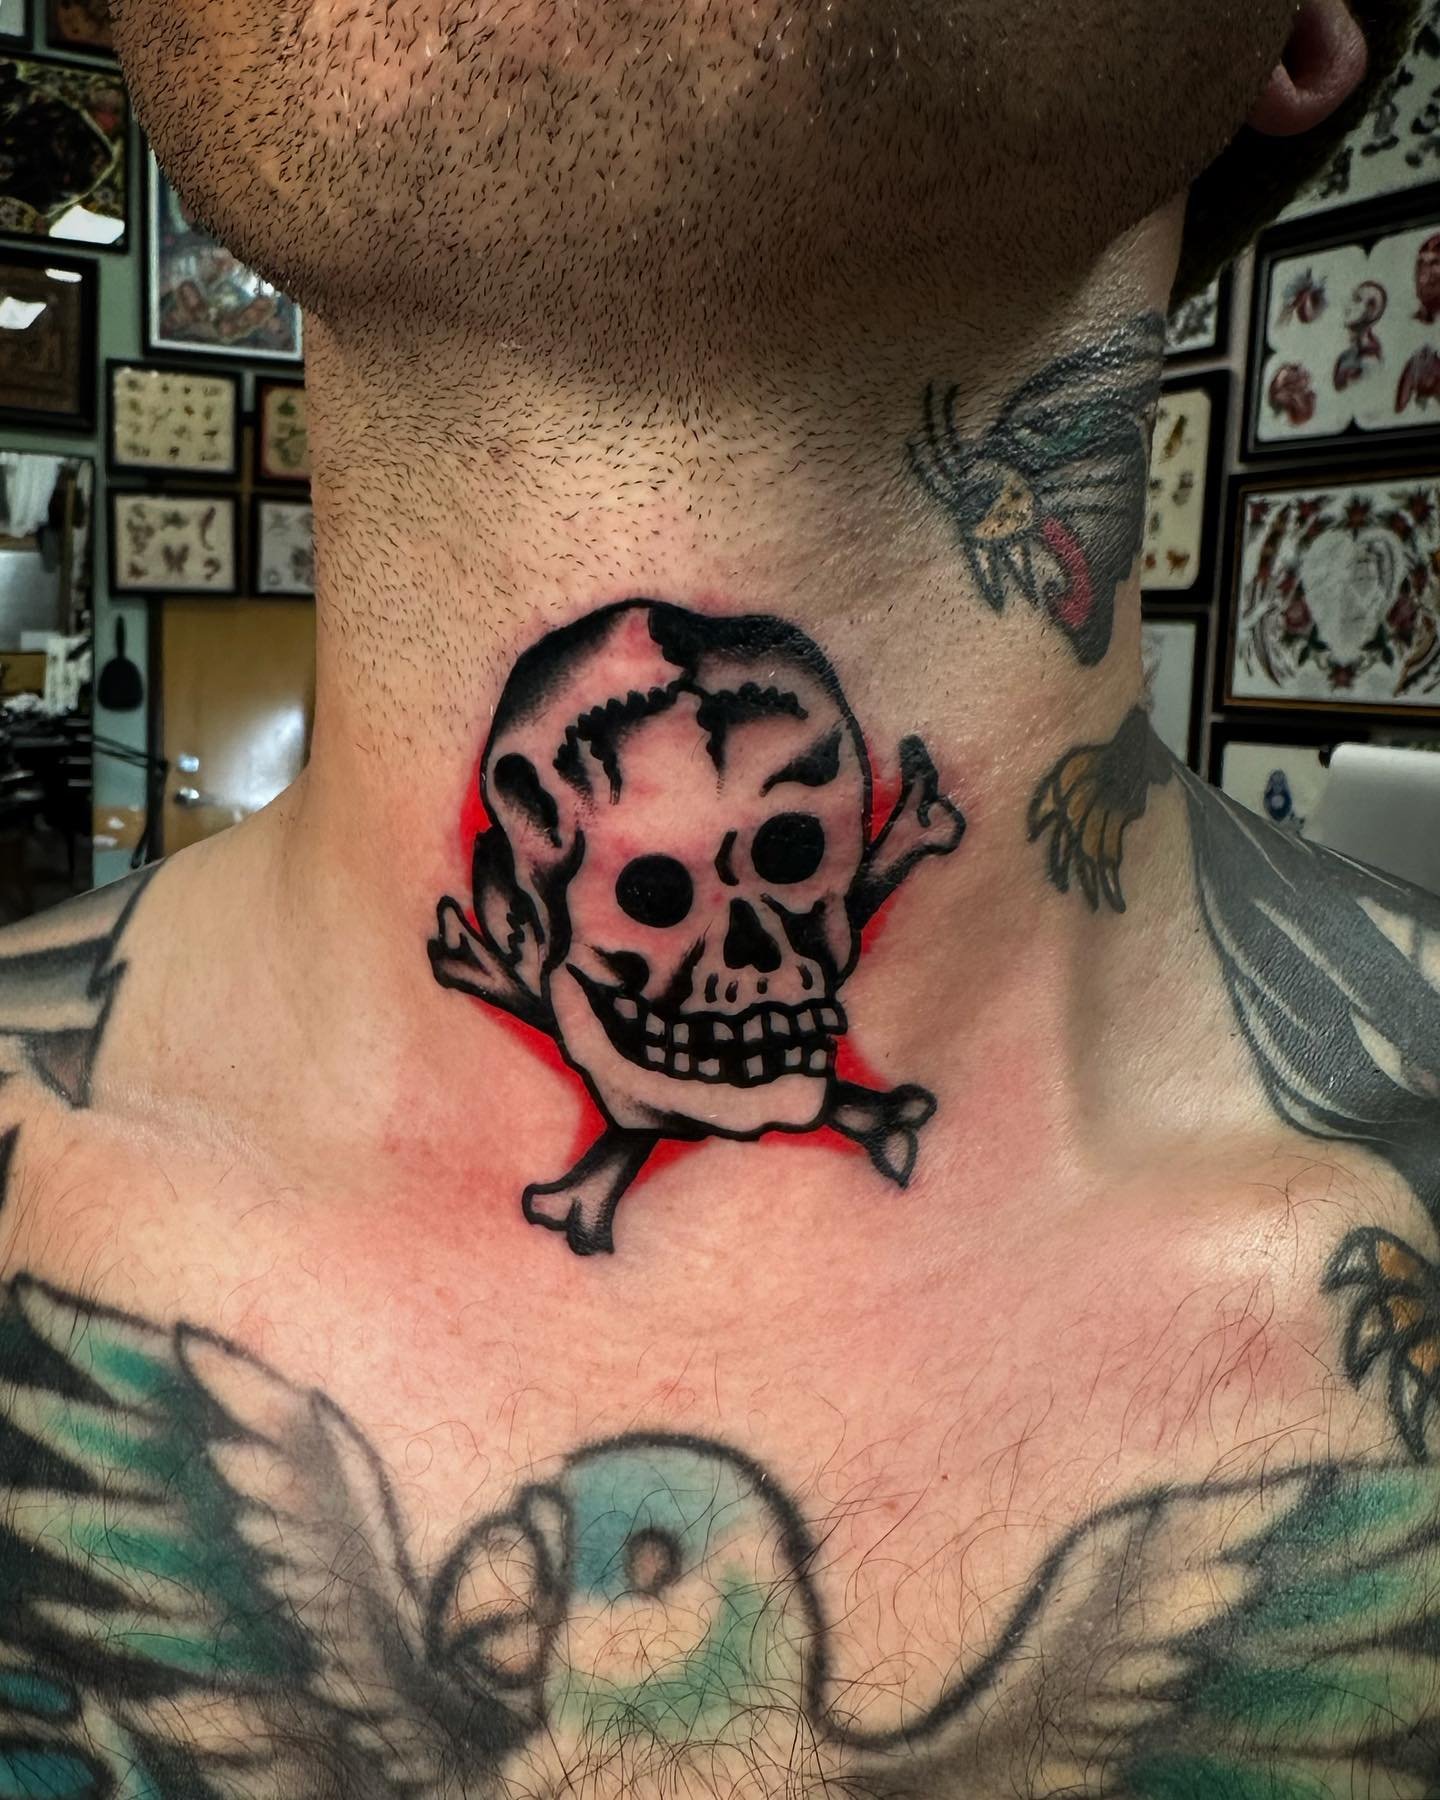 Honored to tattoo my handsome friend&rsquo;s throat. Thanks @liveradstudios !